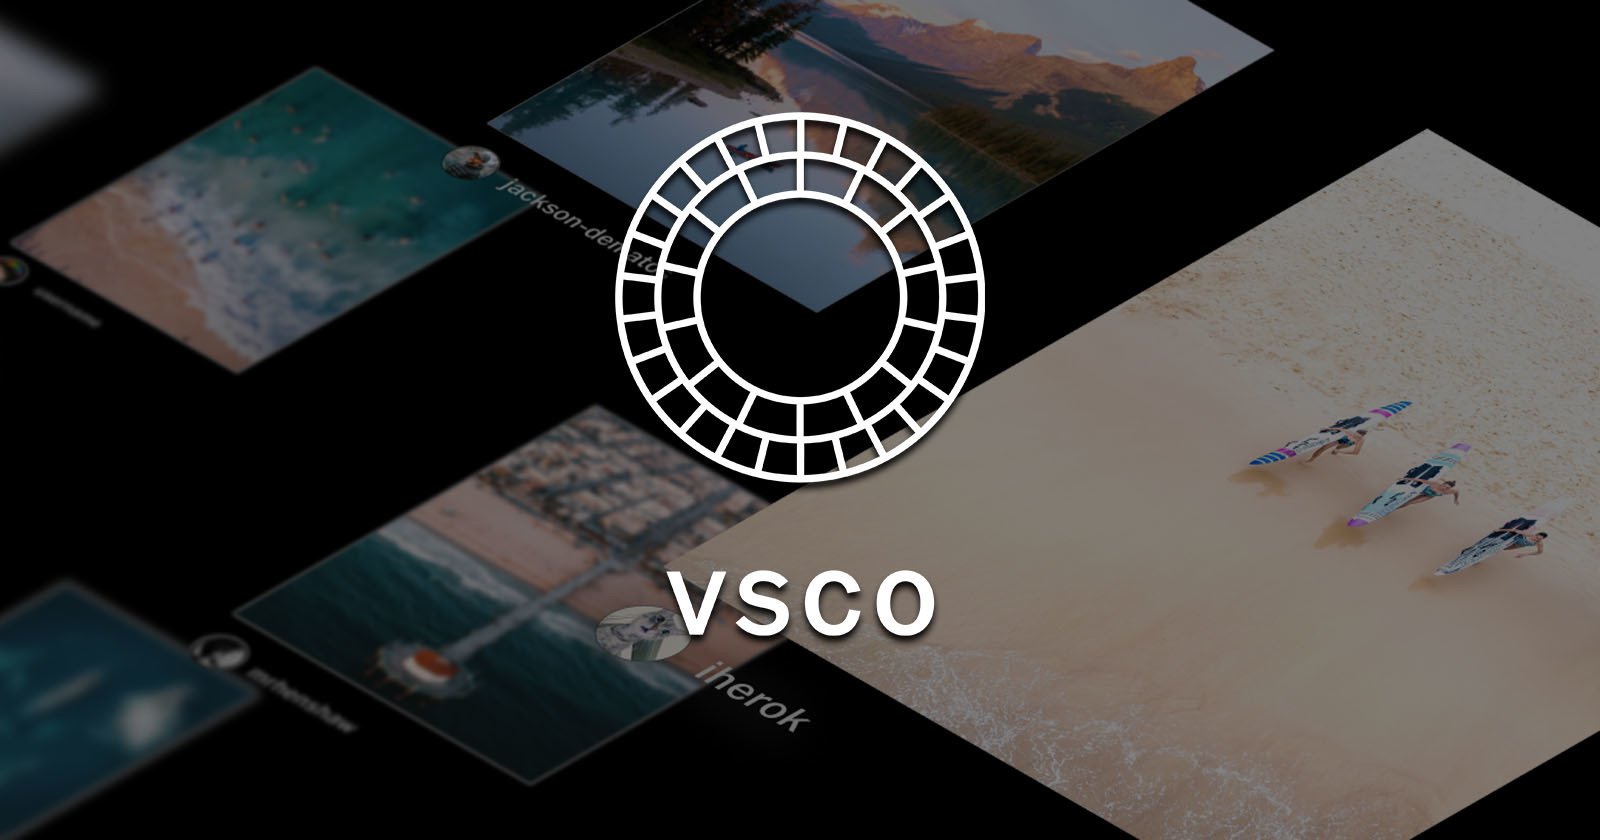 VSCOs Social Network-Like Spaces Community is Now Open to All Users